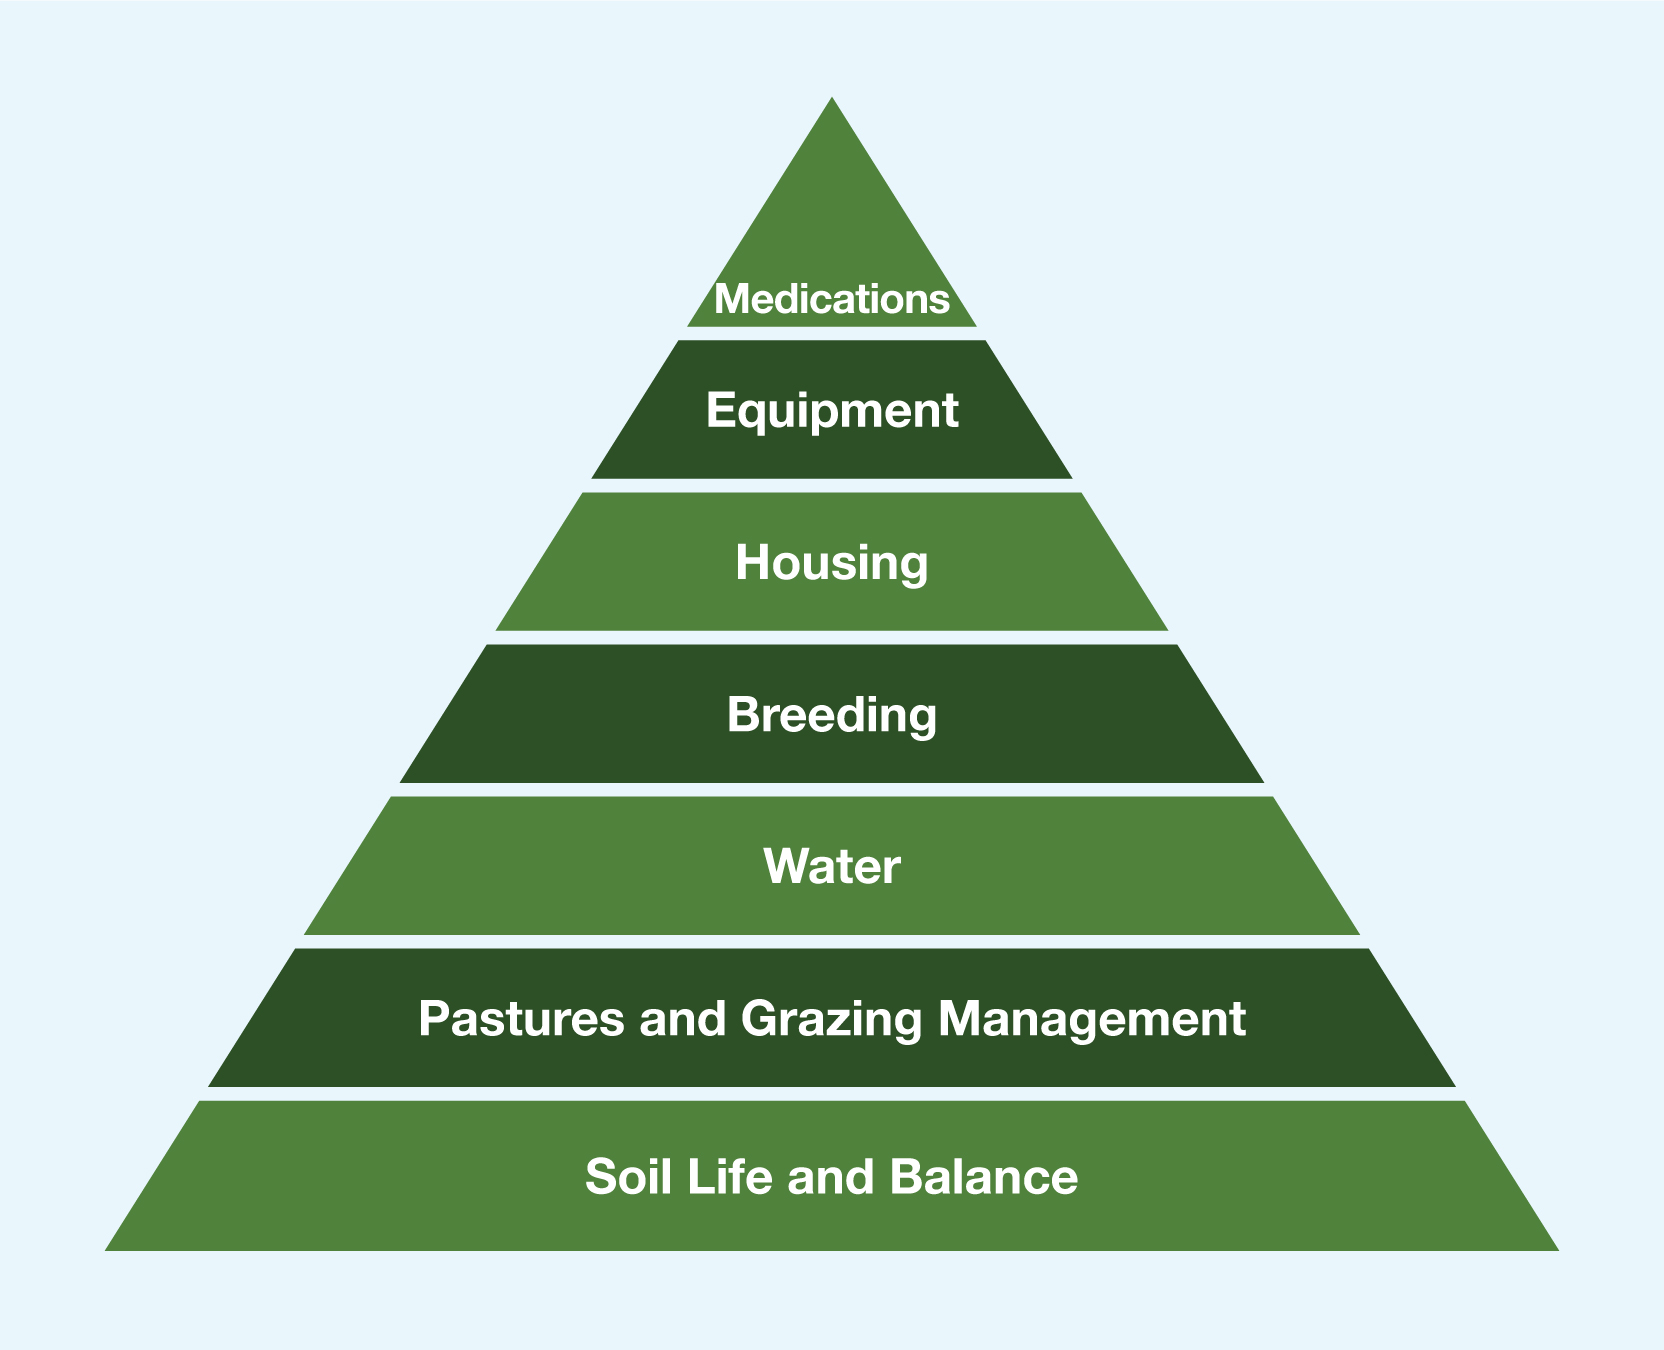 Triangle layered with the following terms (bottom to top): soil life and balance, pasture and grazing management, water, breeding, housing, equipment, and medications